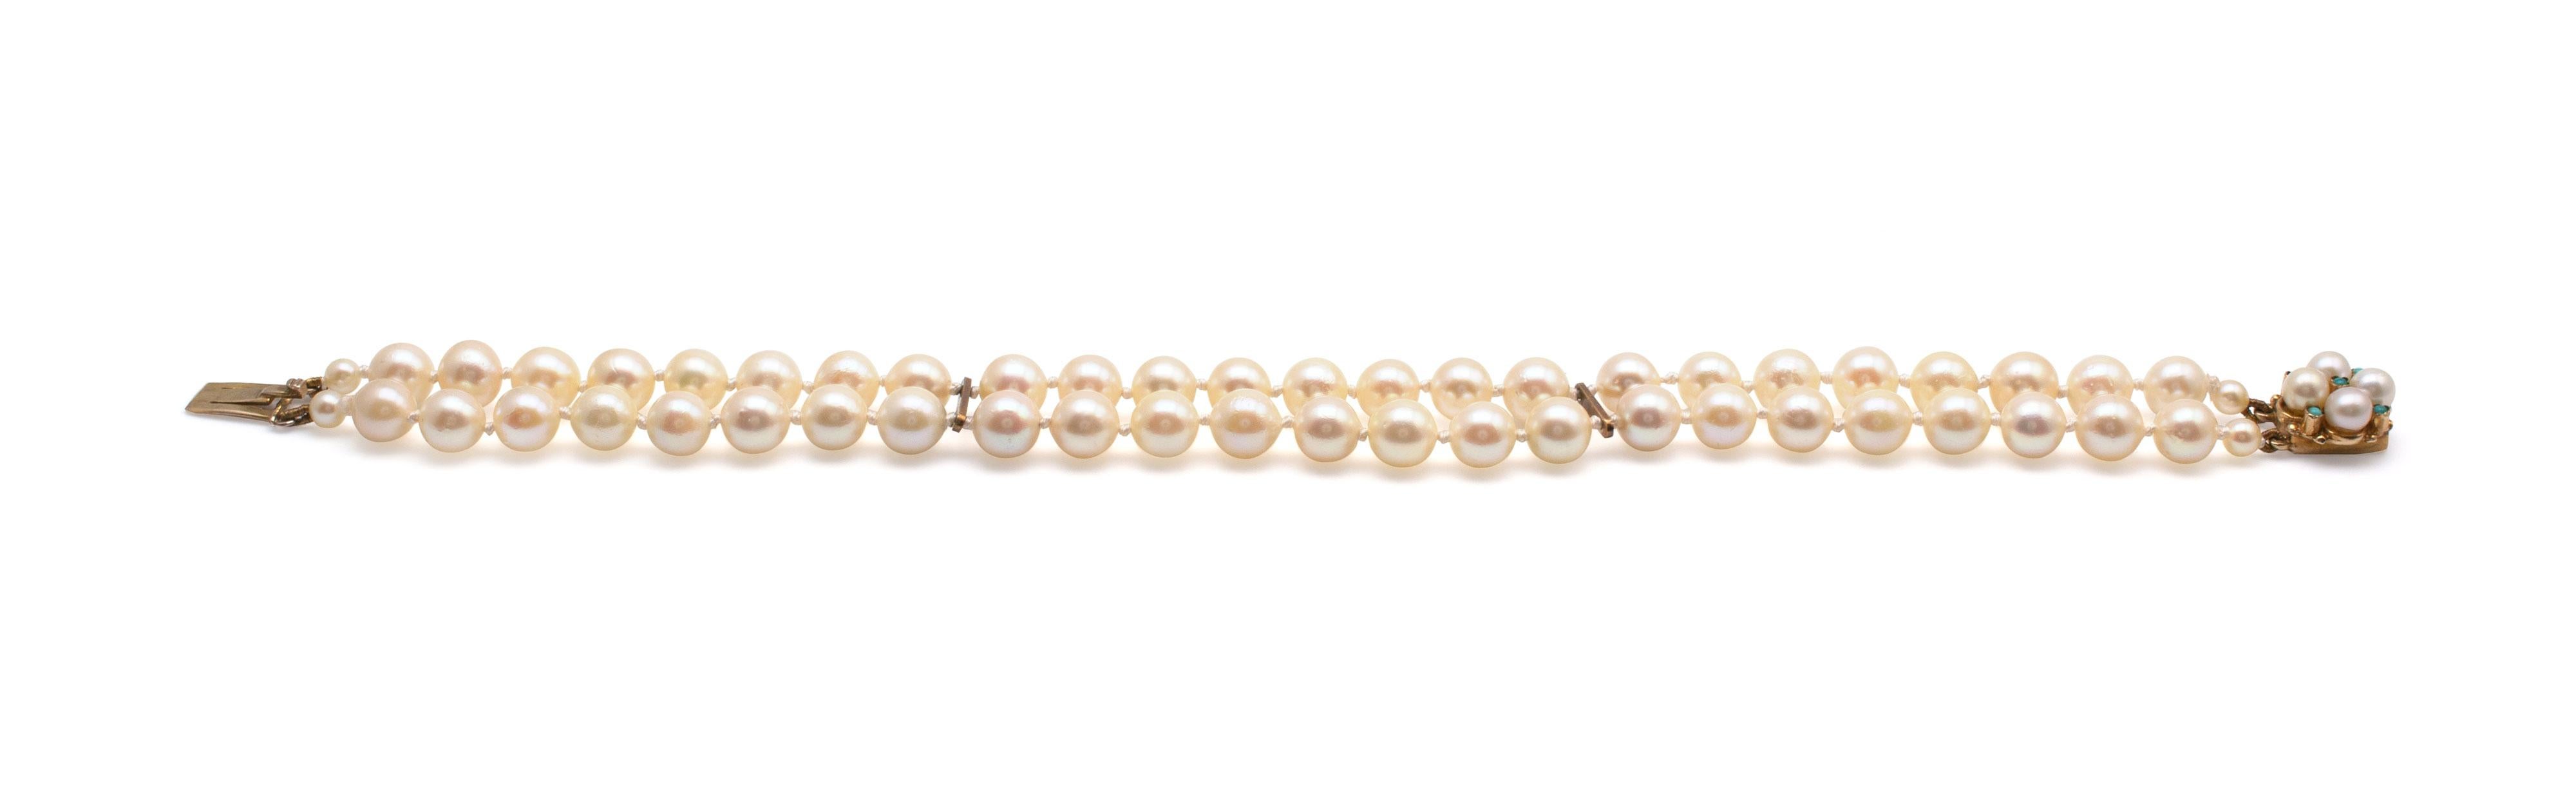 Vintage Double Strand Pearl Turquoise Bracelet Gold Clasp circa 1970s For Sale 4